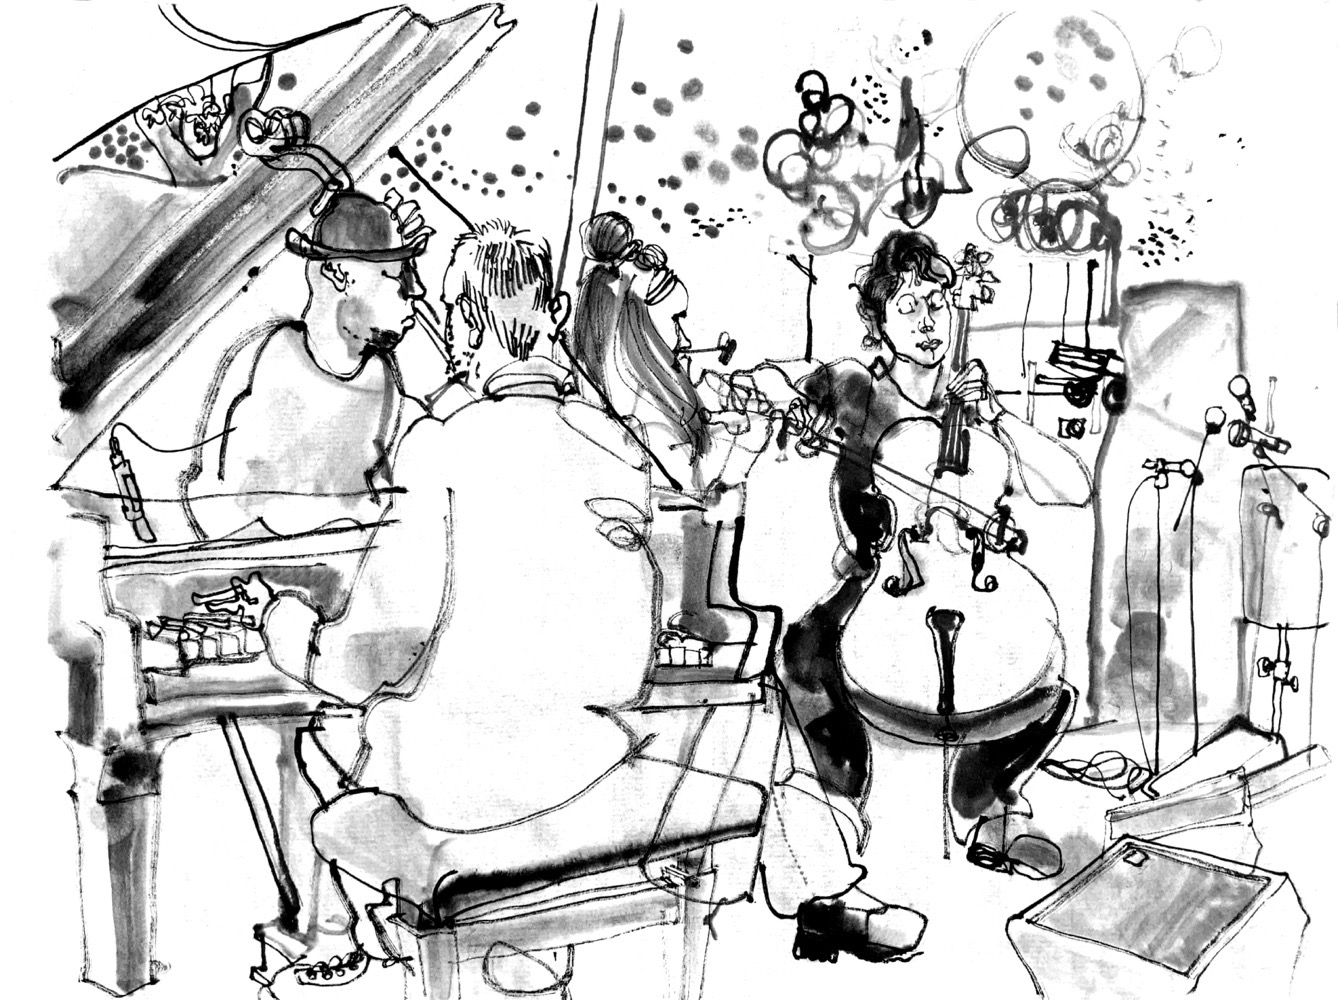 Ink drawing of musicians.